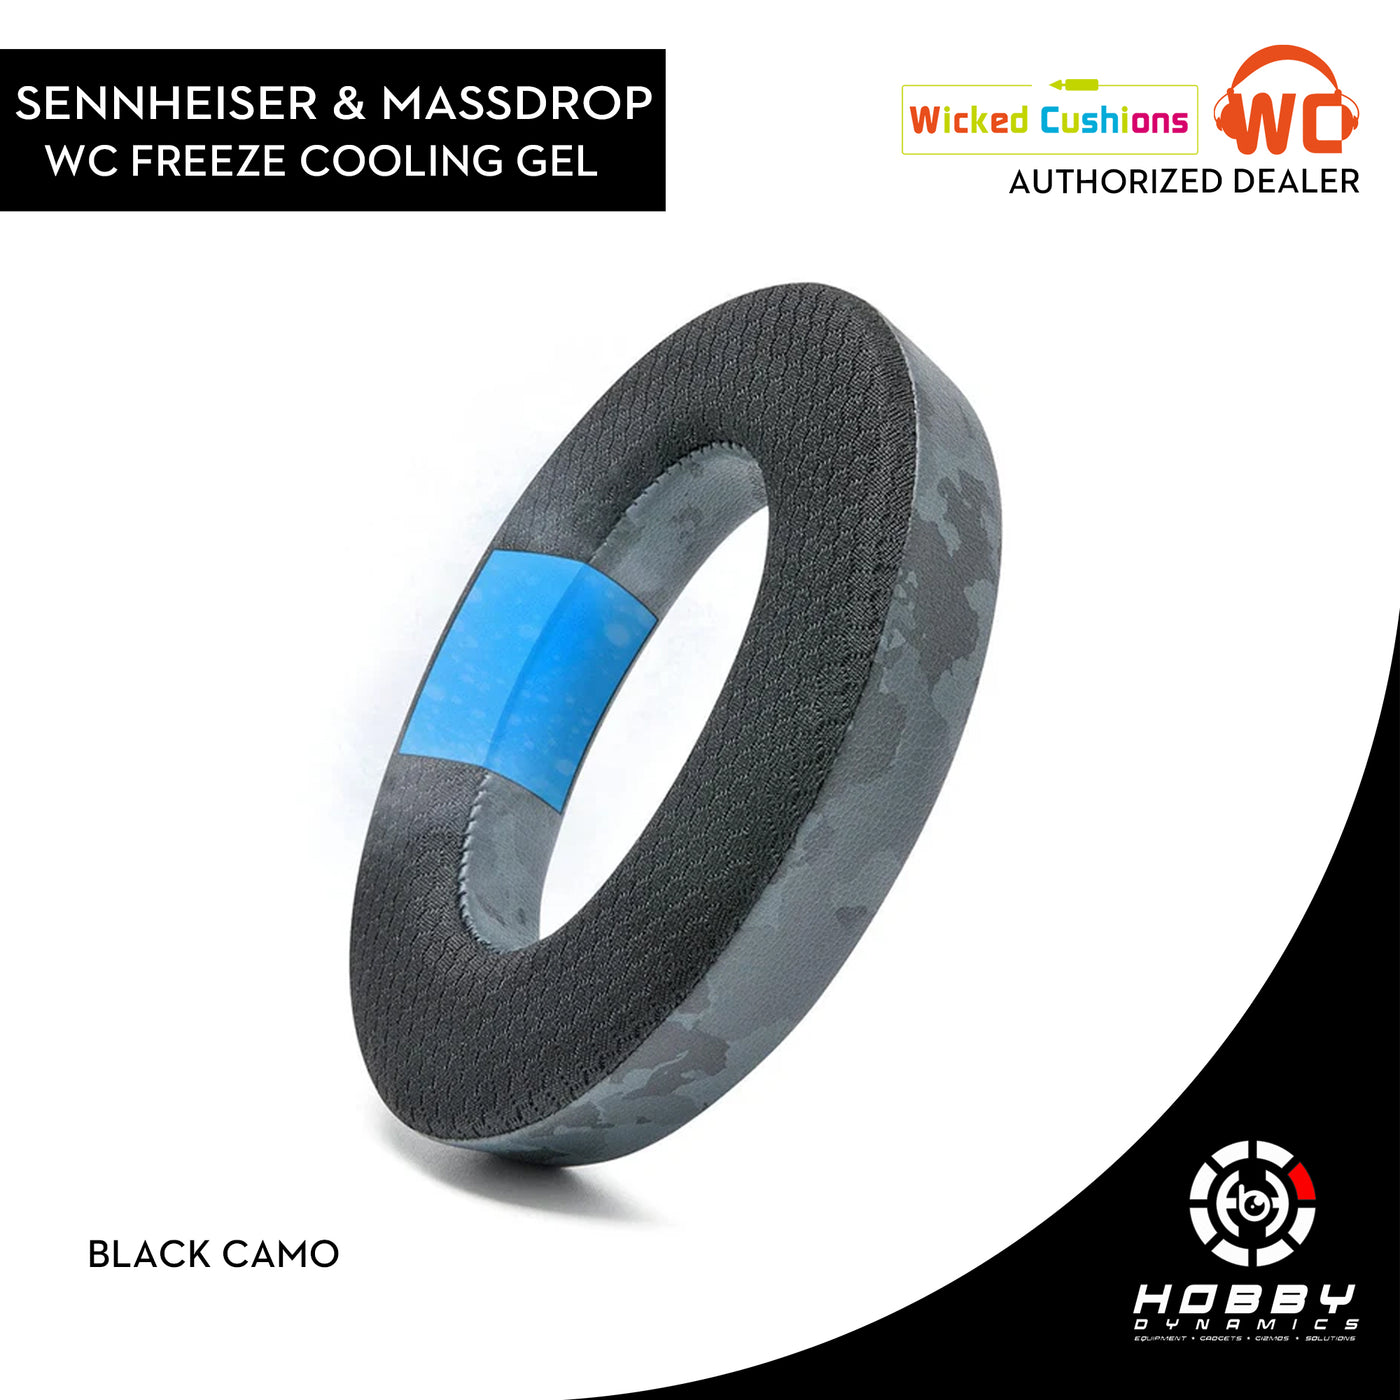 Wicked Cushions Replacement Earpads for Sennheiser & Massdrop - WC FreeZe Cooling Gel